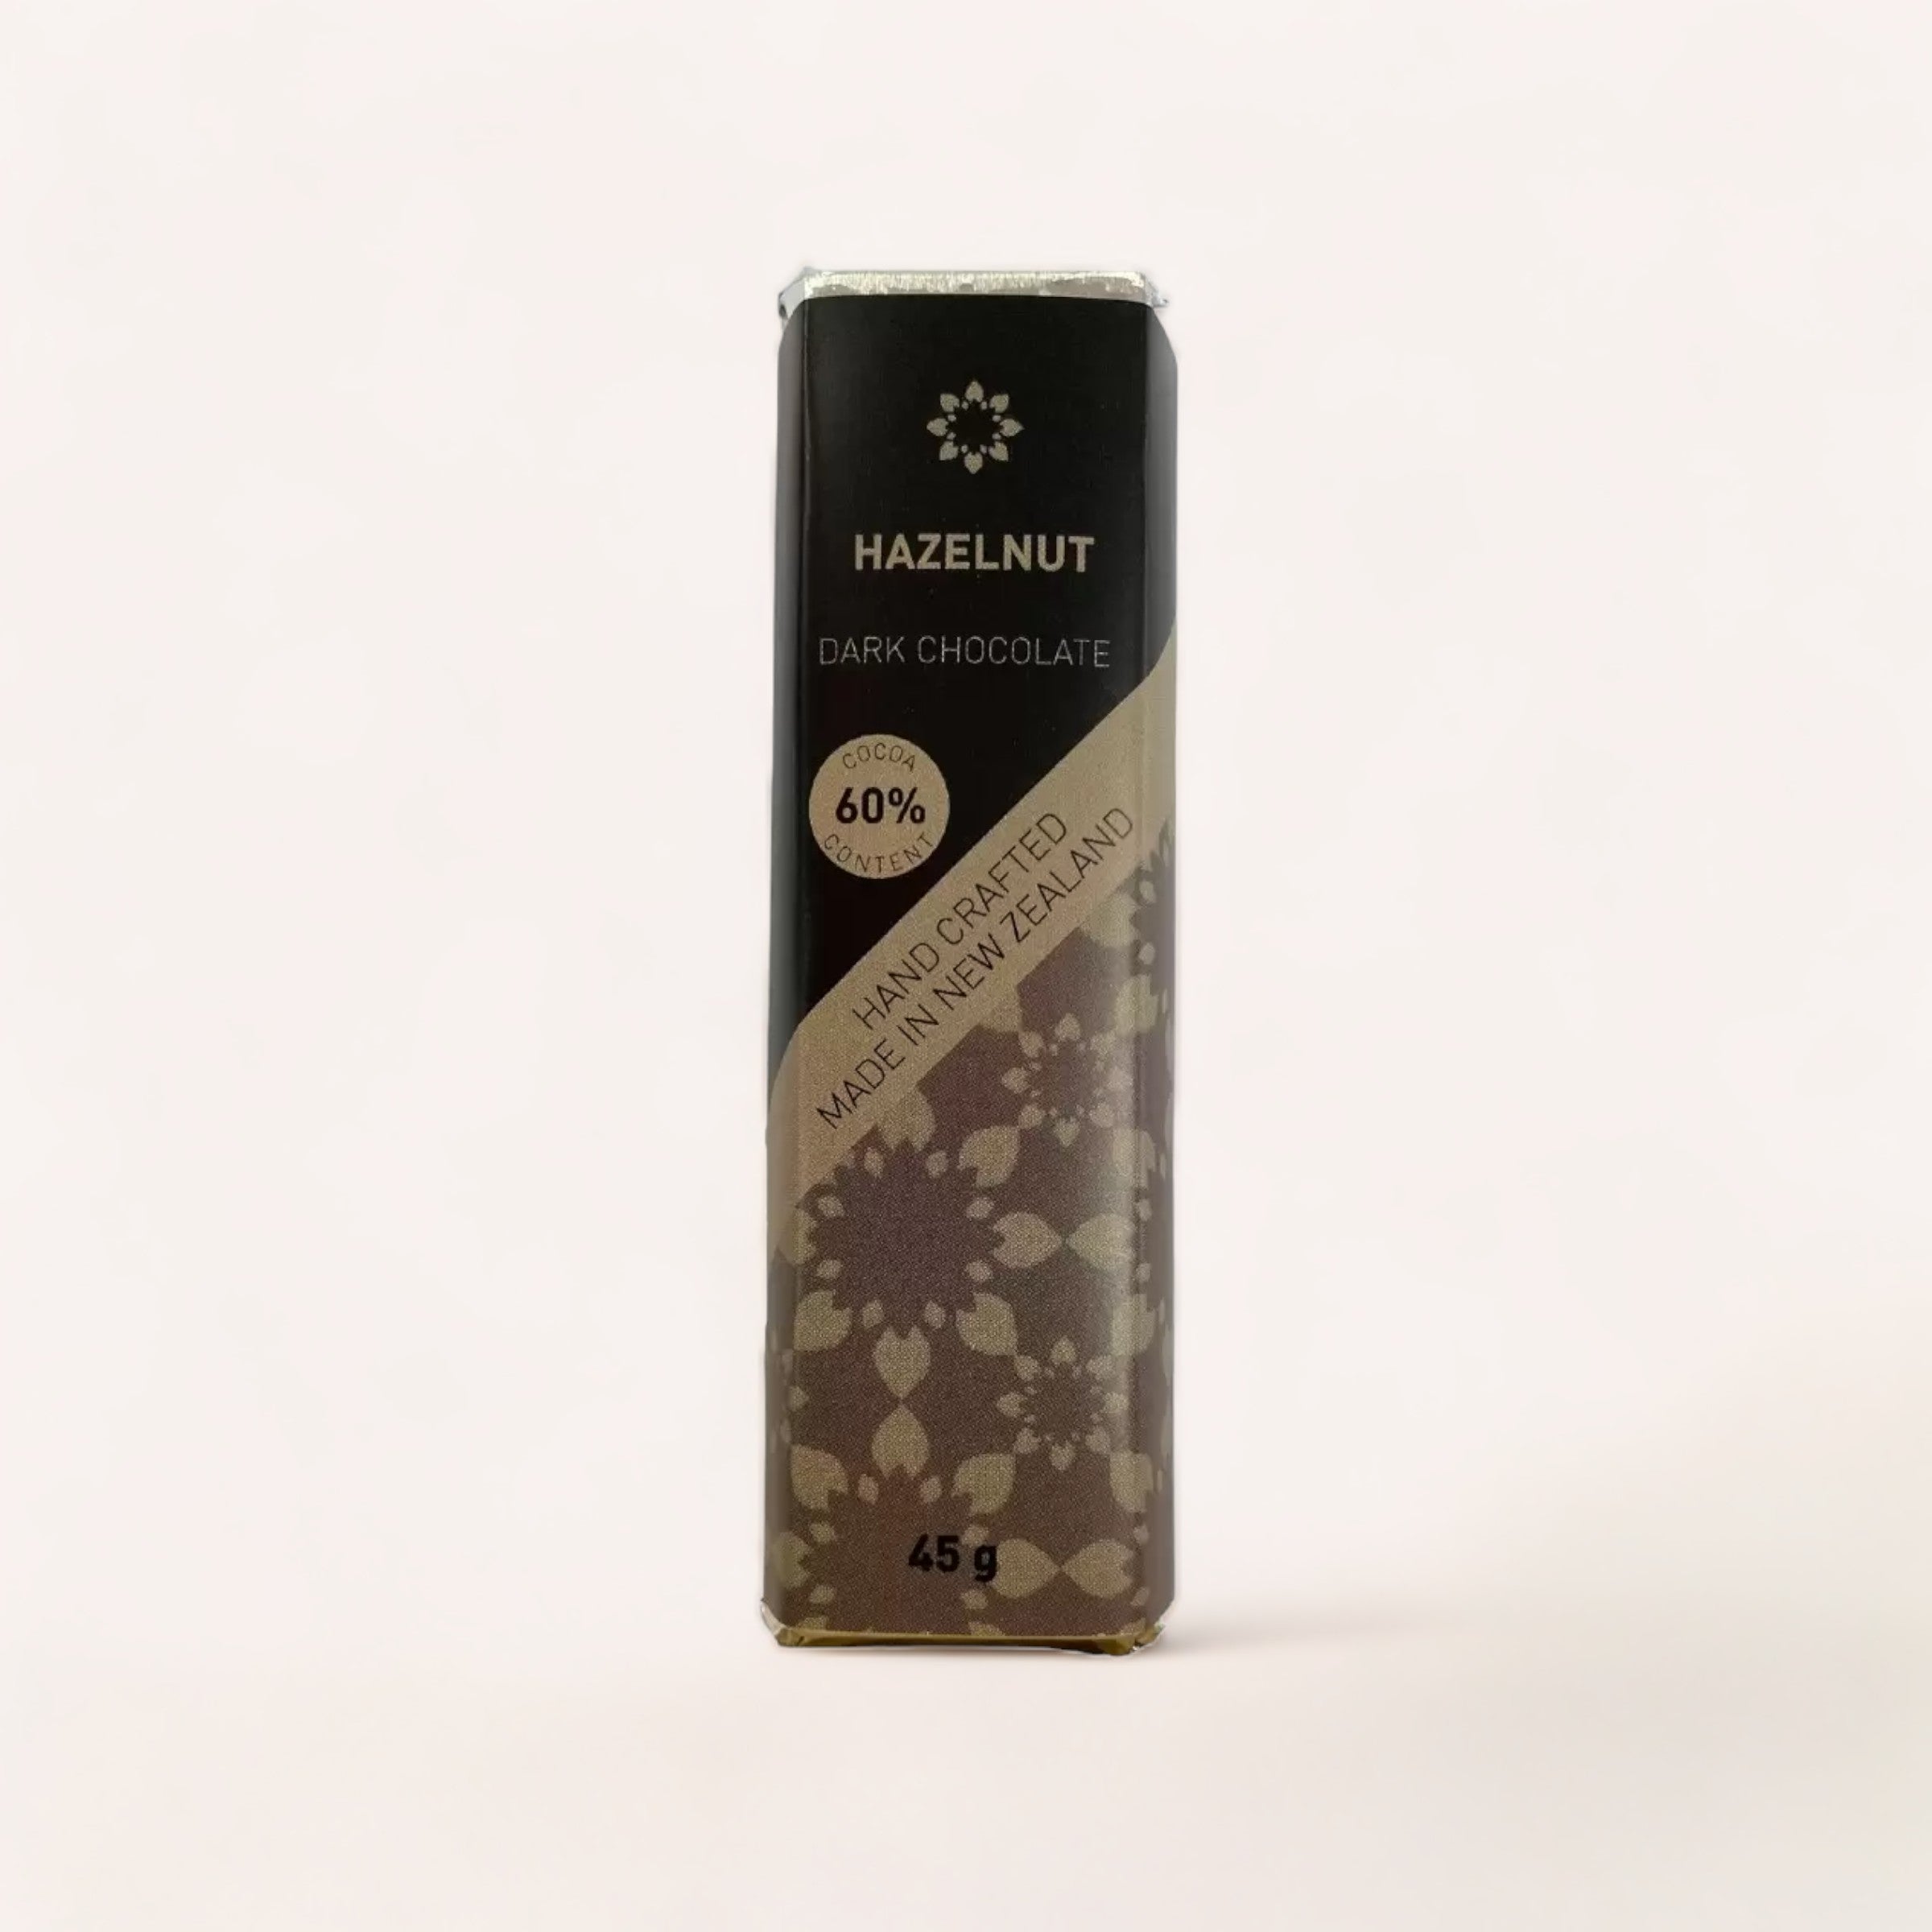 A hand-crafted bar of Hazelnut Chocolate bar by Chocolate Traders with 60% cocoa, Product of New Zealand, elegantly wrapped in a package with floral motifs.